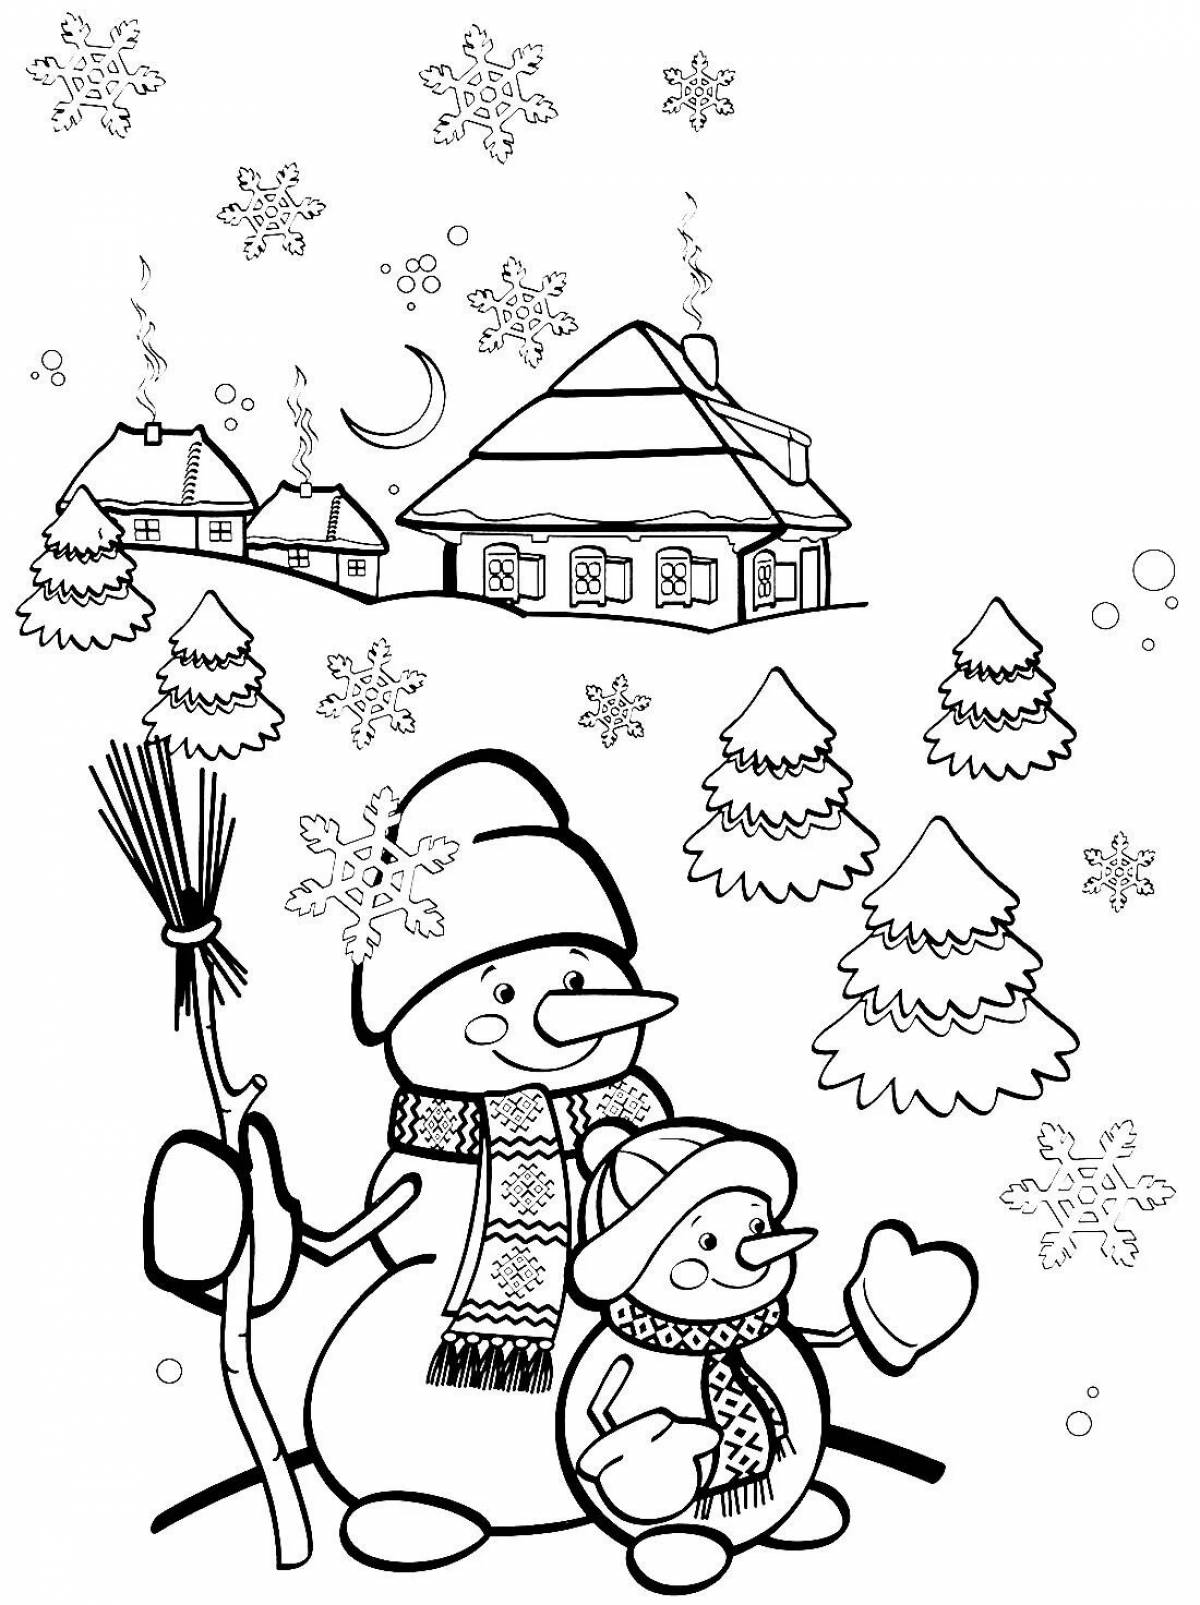 Refreshing December coloring book for kids